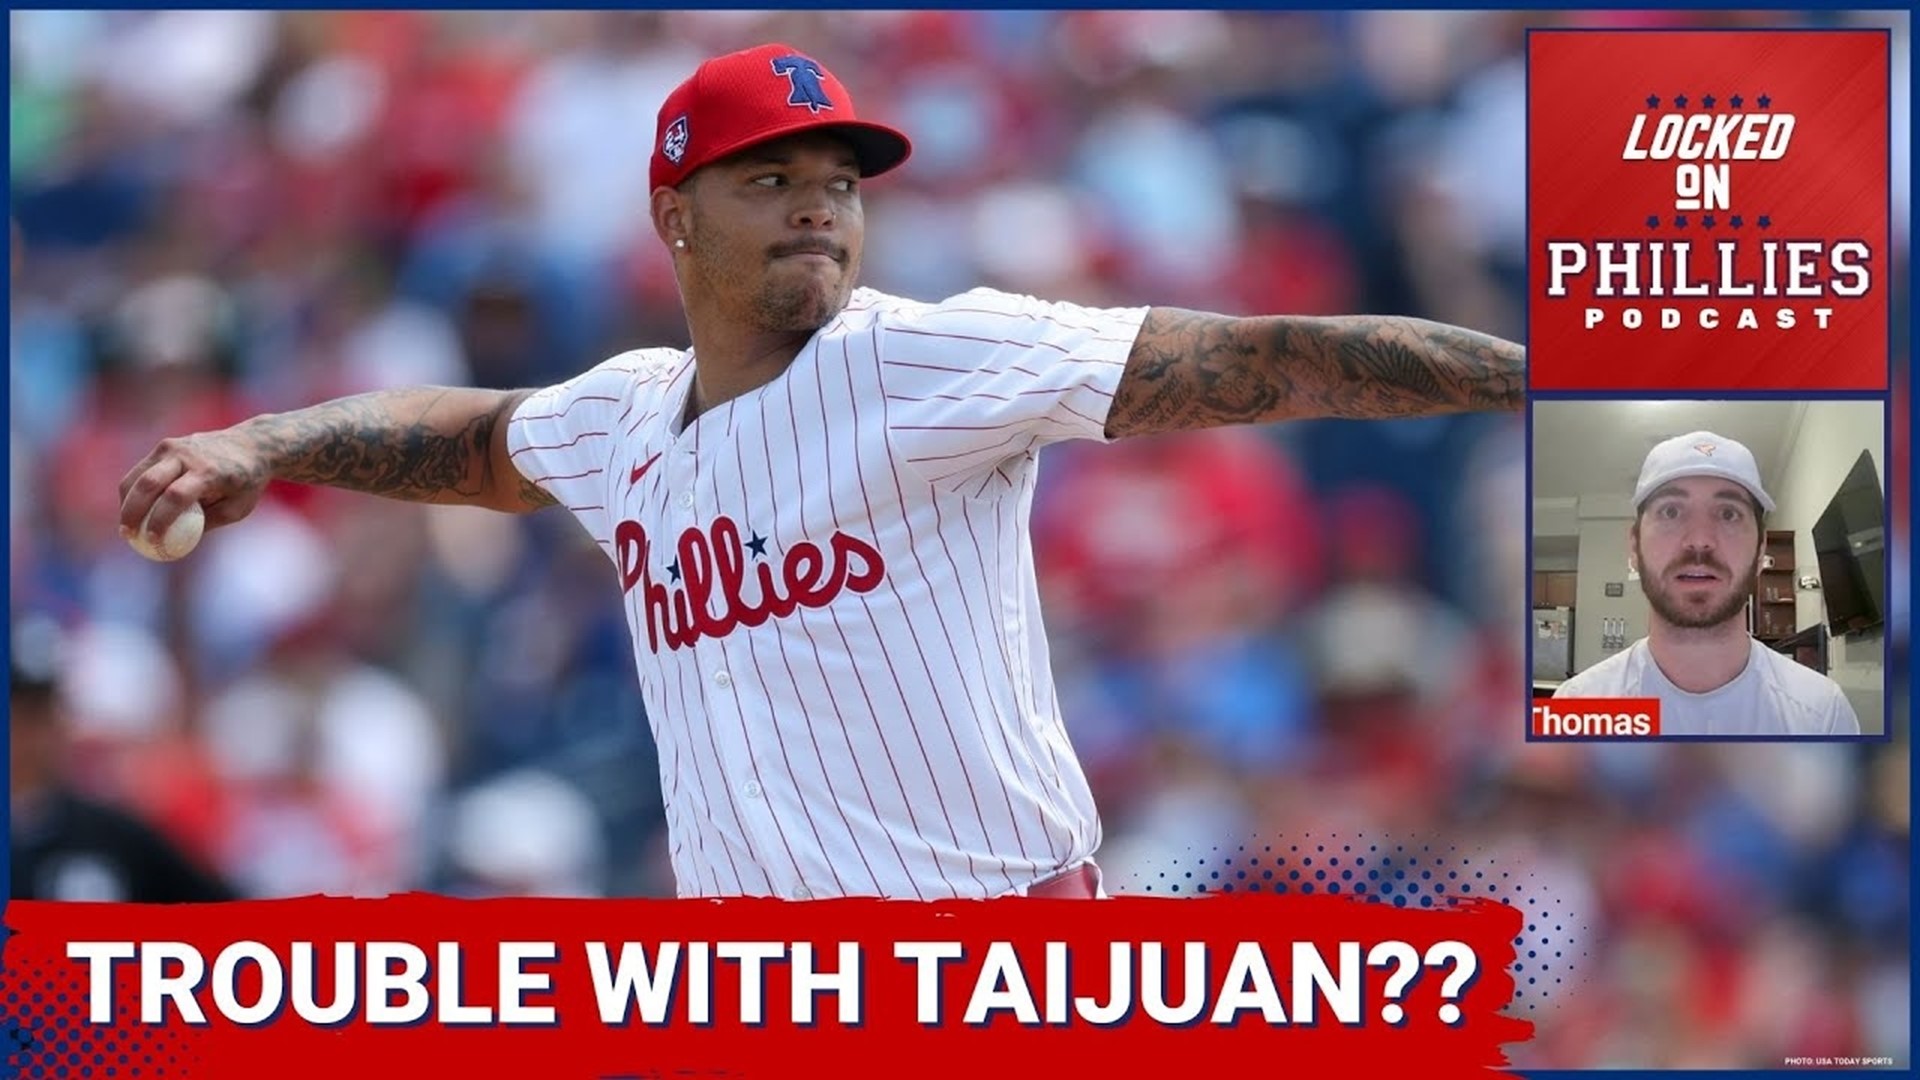 In today's episode, Connor is a bit worried about Philadelphia Phillies Starting Pitcher Taijuan Walker.